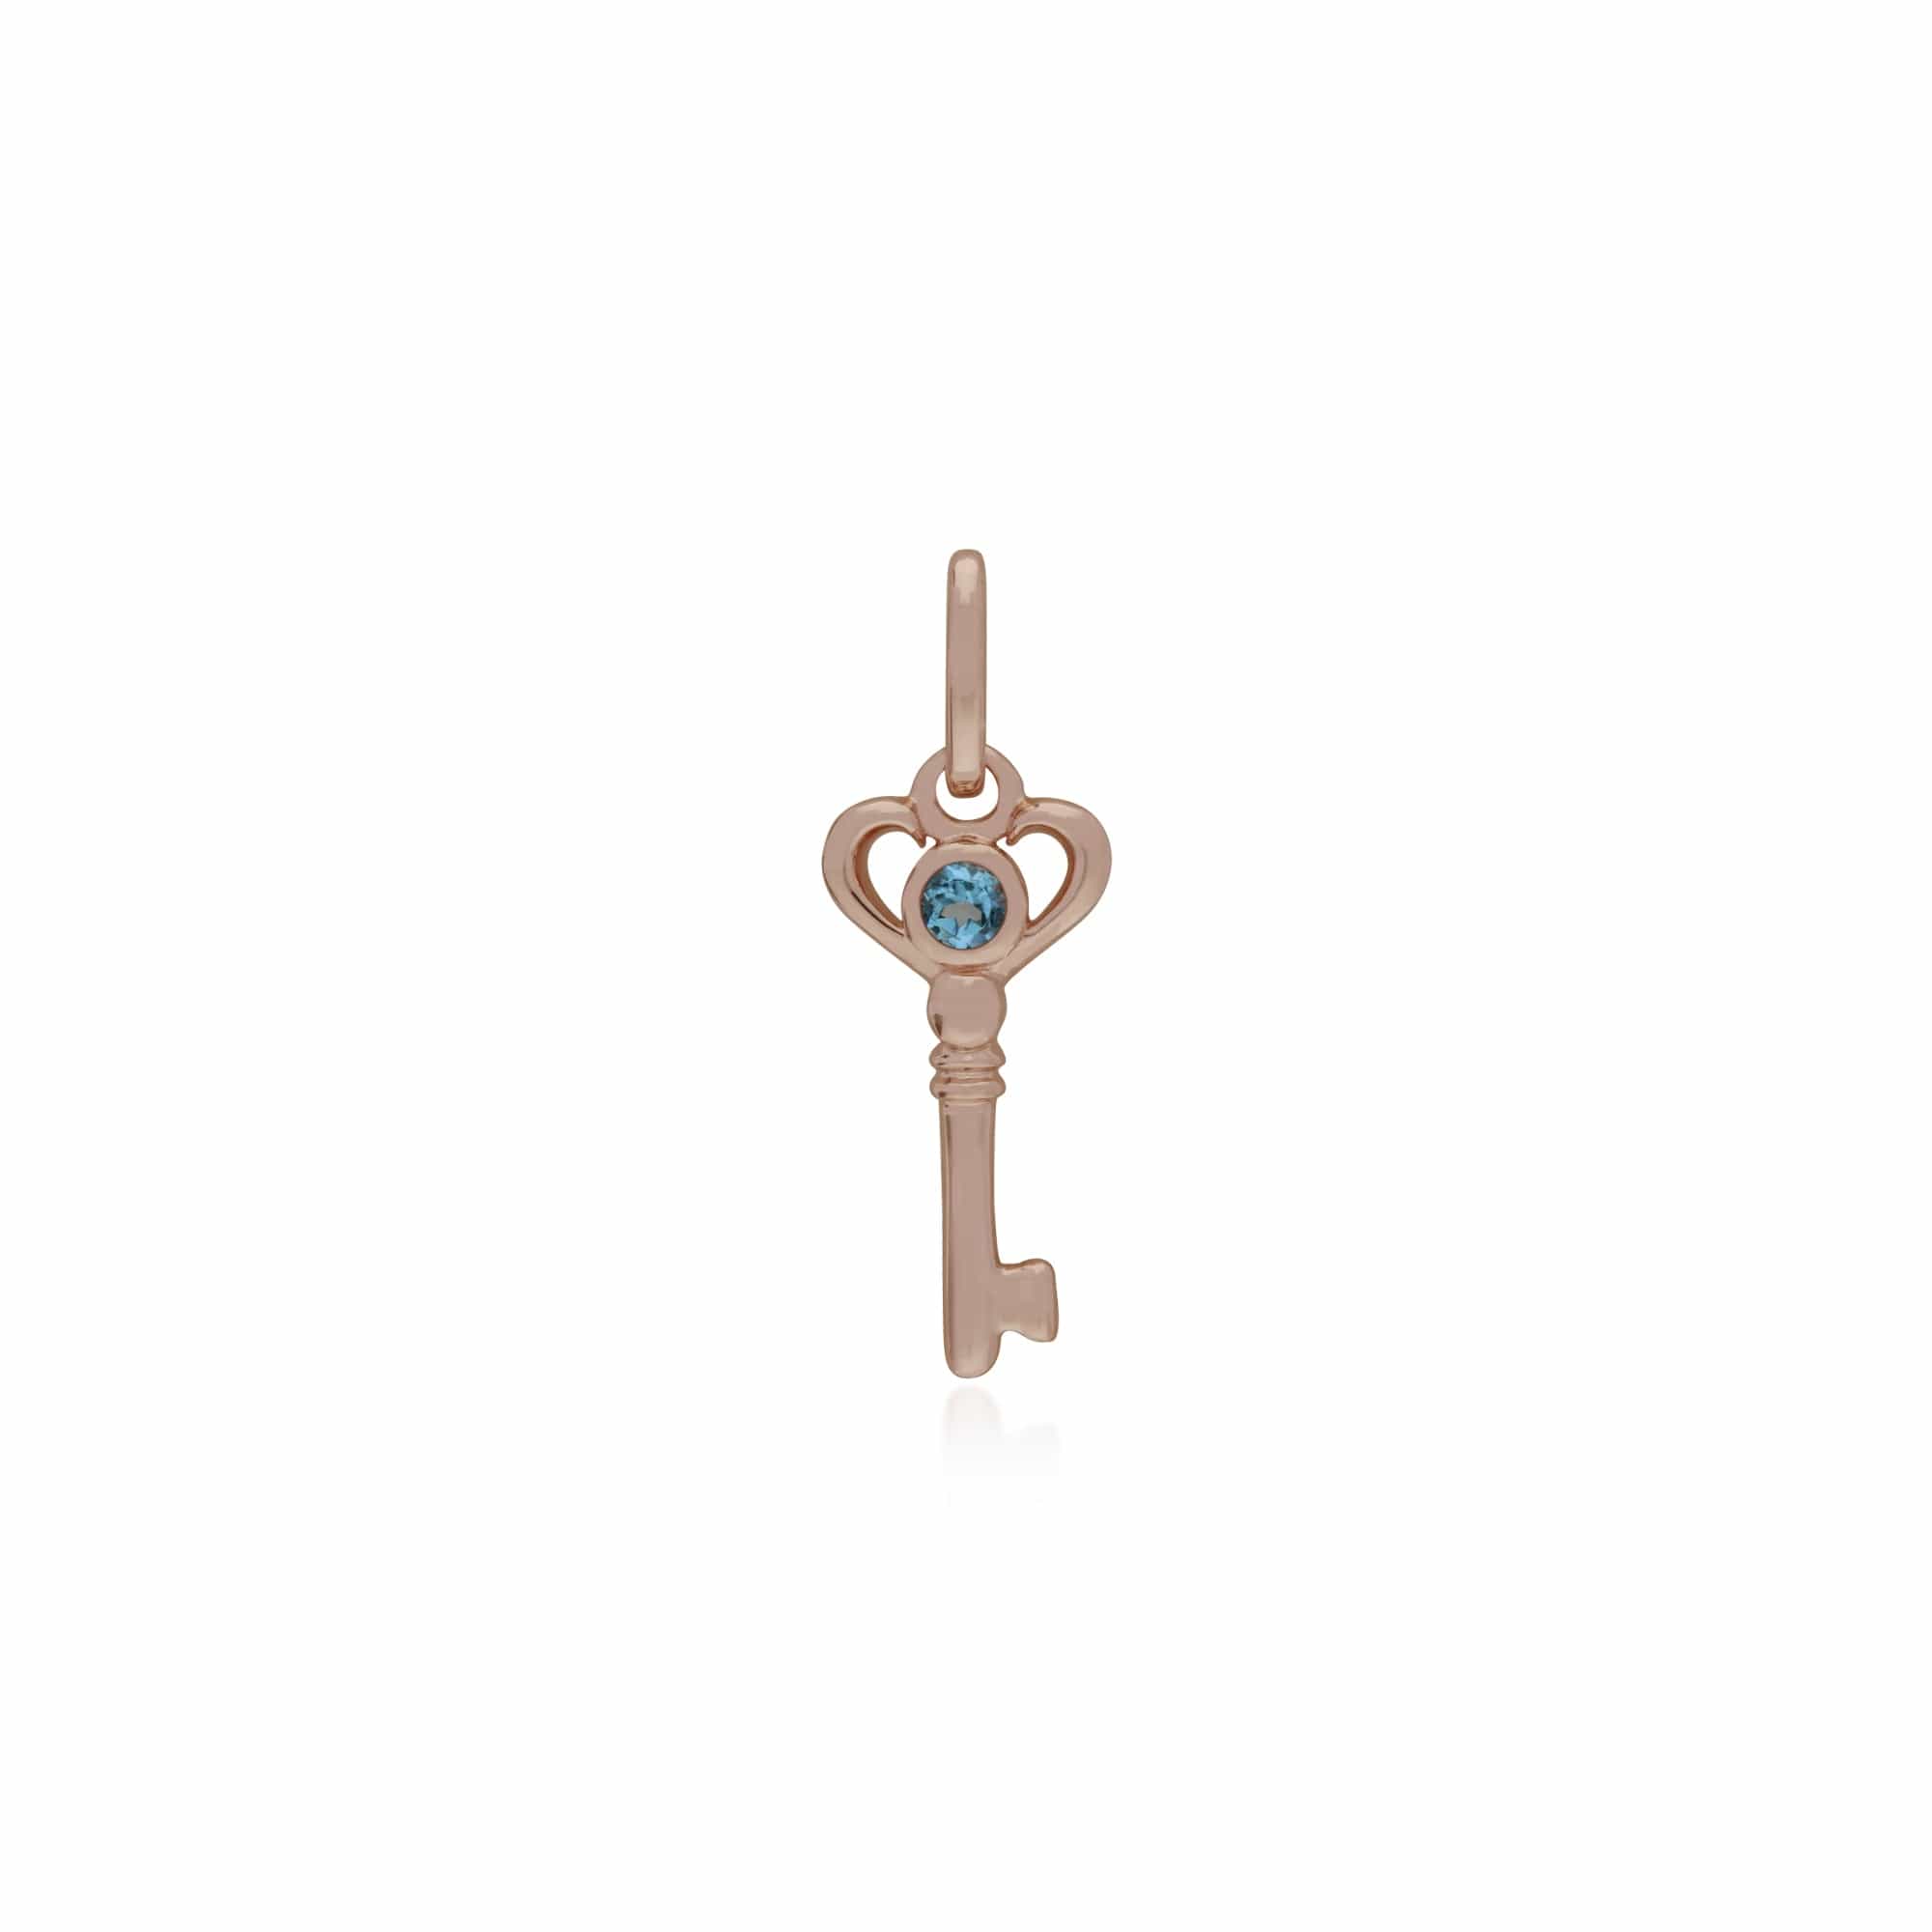 270P026305925-270P026901925 Classic Heart Lock Pendant & Blue Topaz Key Charm in Rose Gold Plated 925 Sterling Silver 2